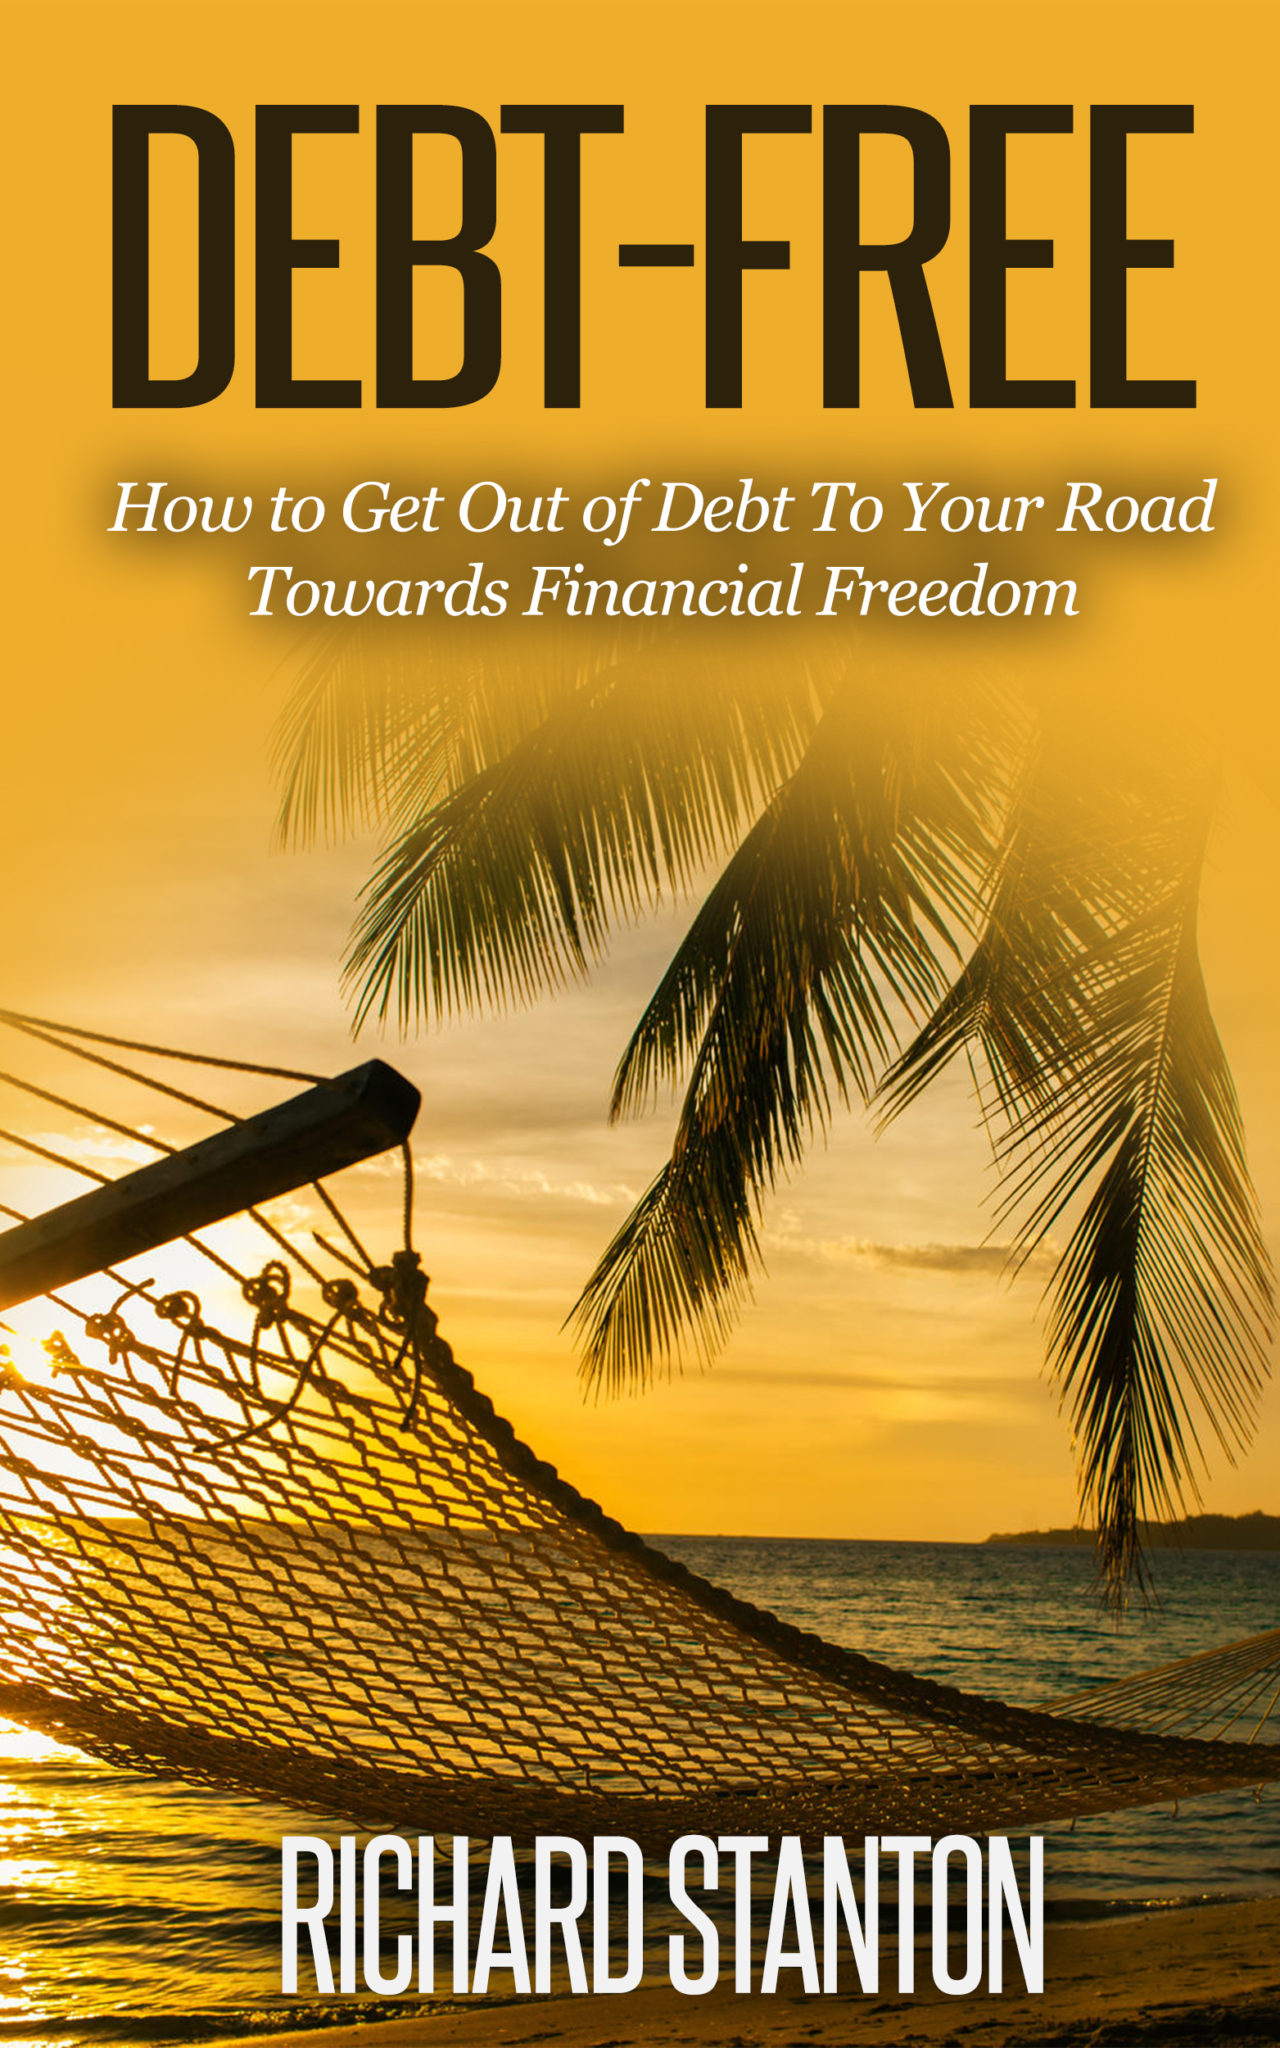 FREE: Debt-Free: How to Get Out of Debt To Your Road Towards Financial Freedom by Richard Stanton